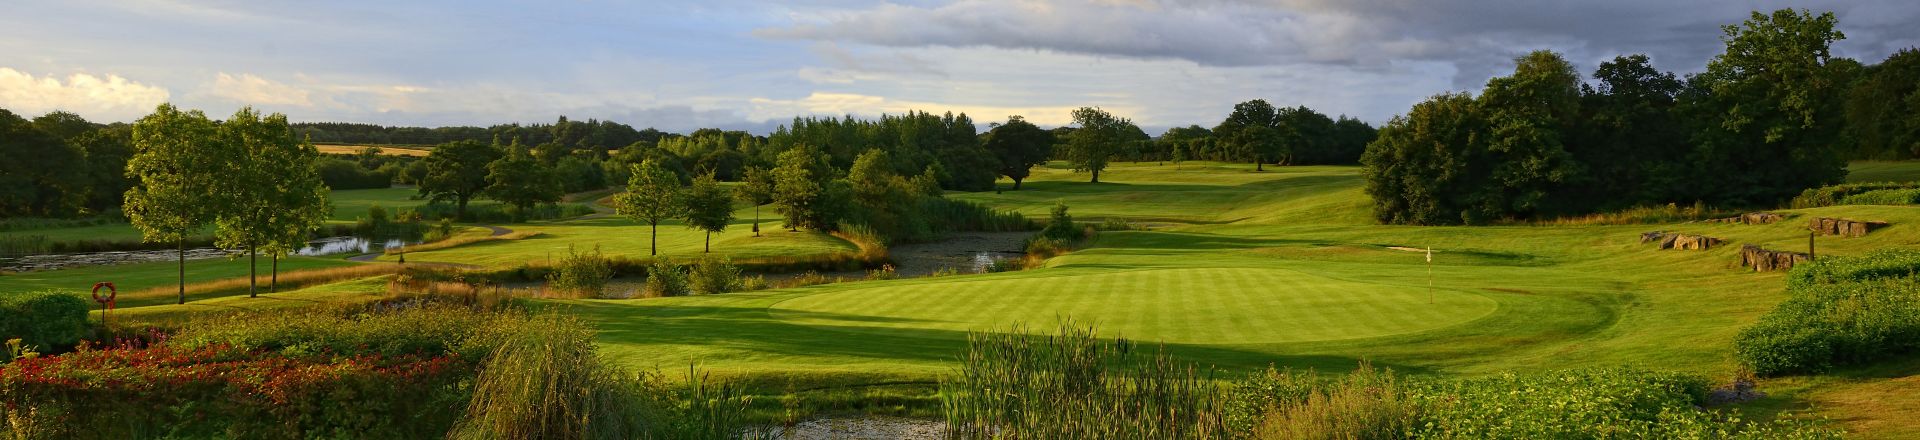 The Vale Resort Wales National Golf Course